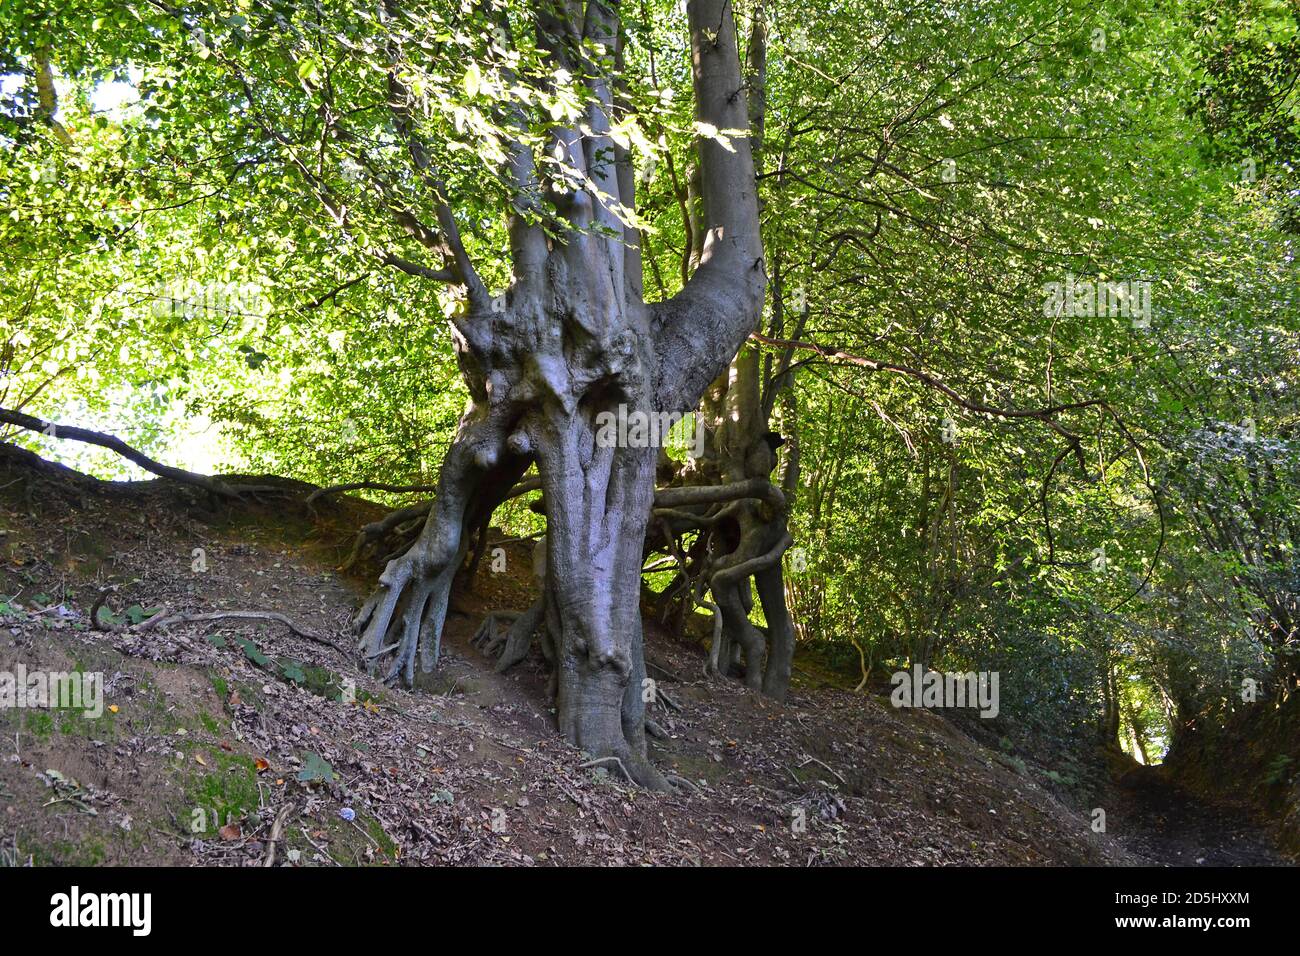 Incredible beech trees growing out of sandstone hillside, Greensand Ridge, Sevenoaks. Bizarre trees look alive - like Lord of the Rings' Ents Stock Photo